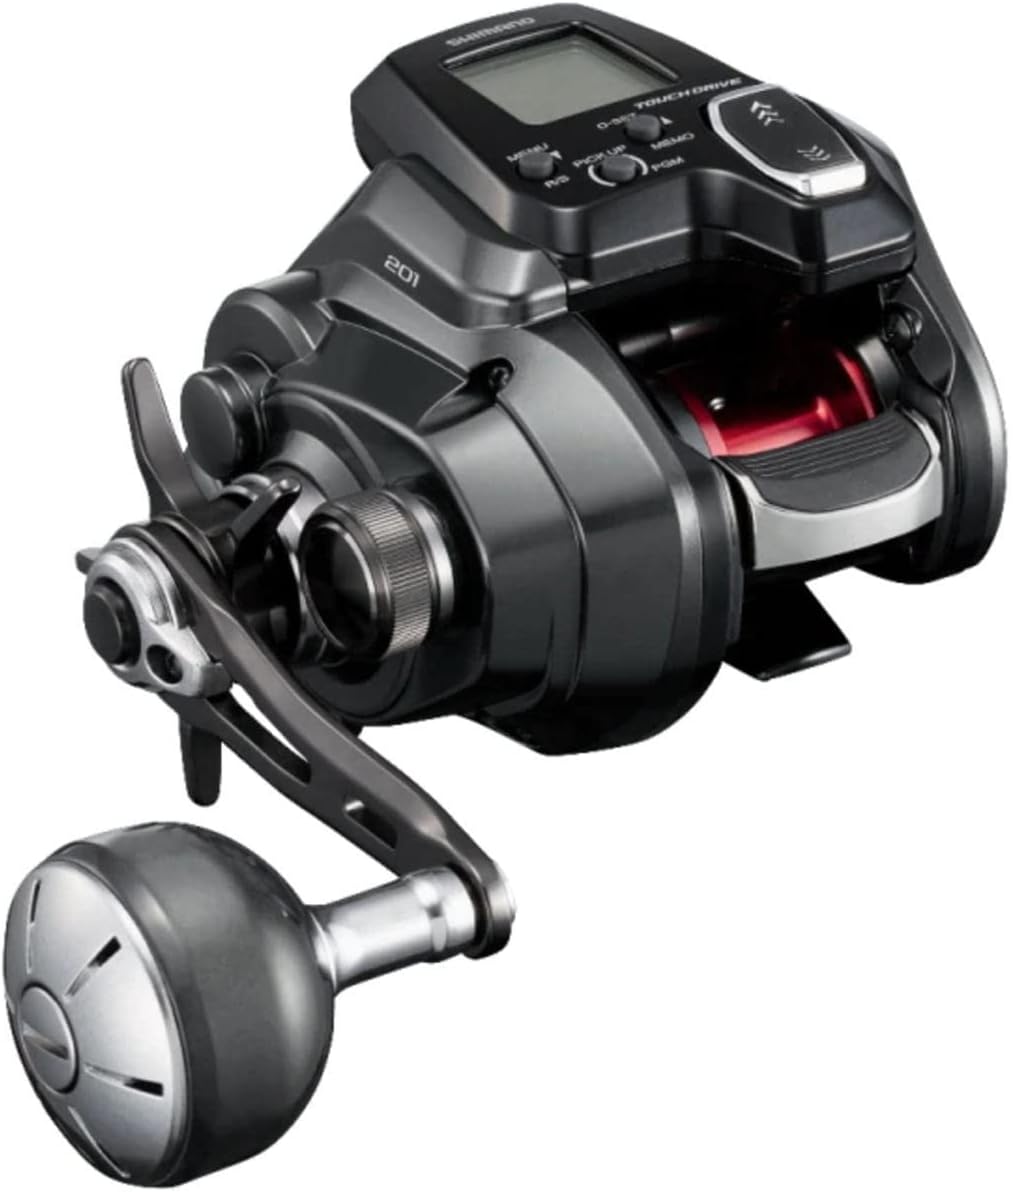 SHIMANO electric reel 22 force master various - Discovery Japan Mall